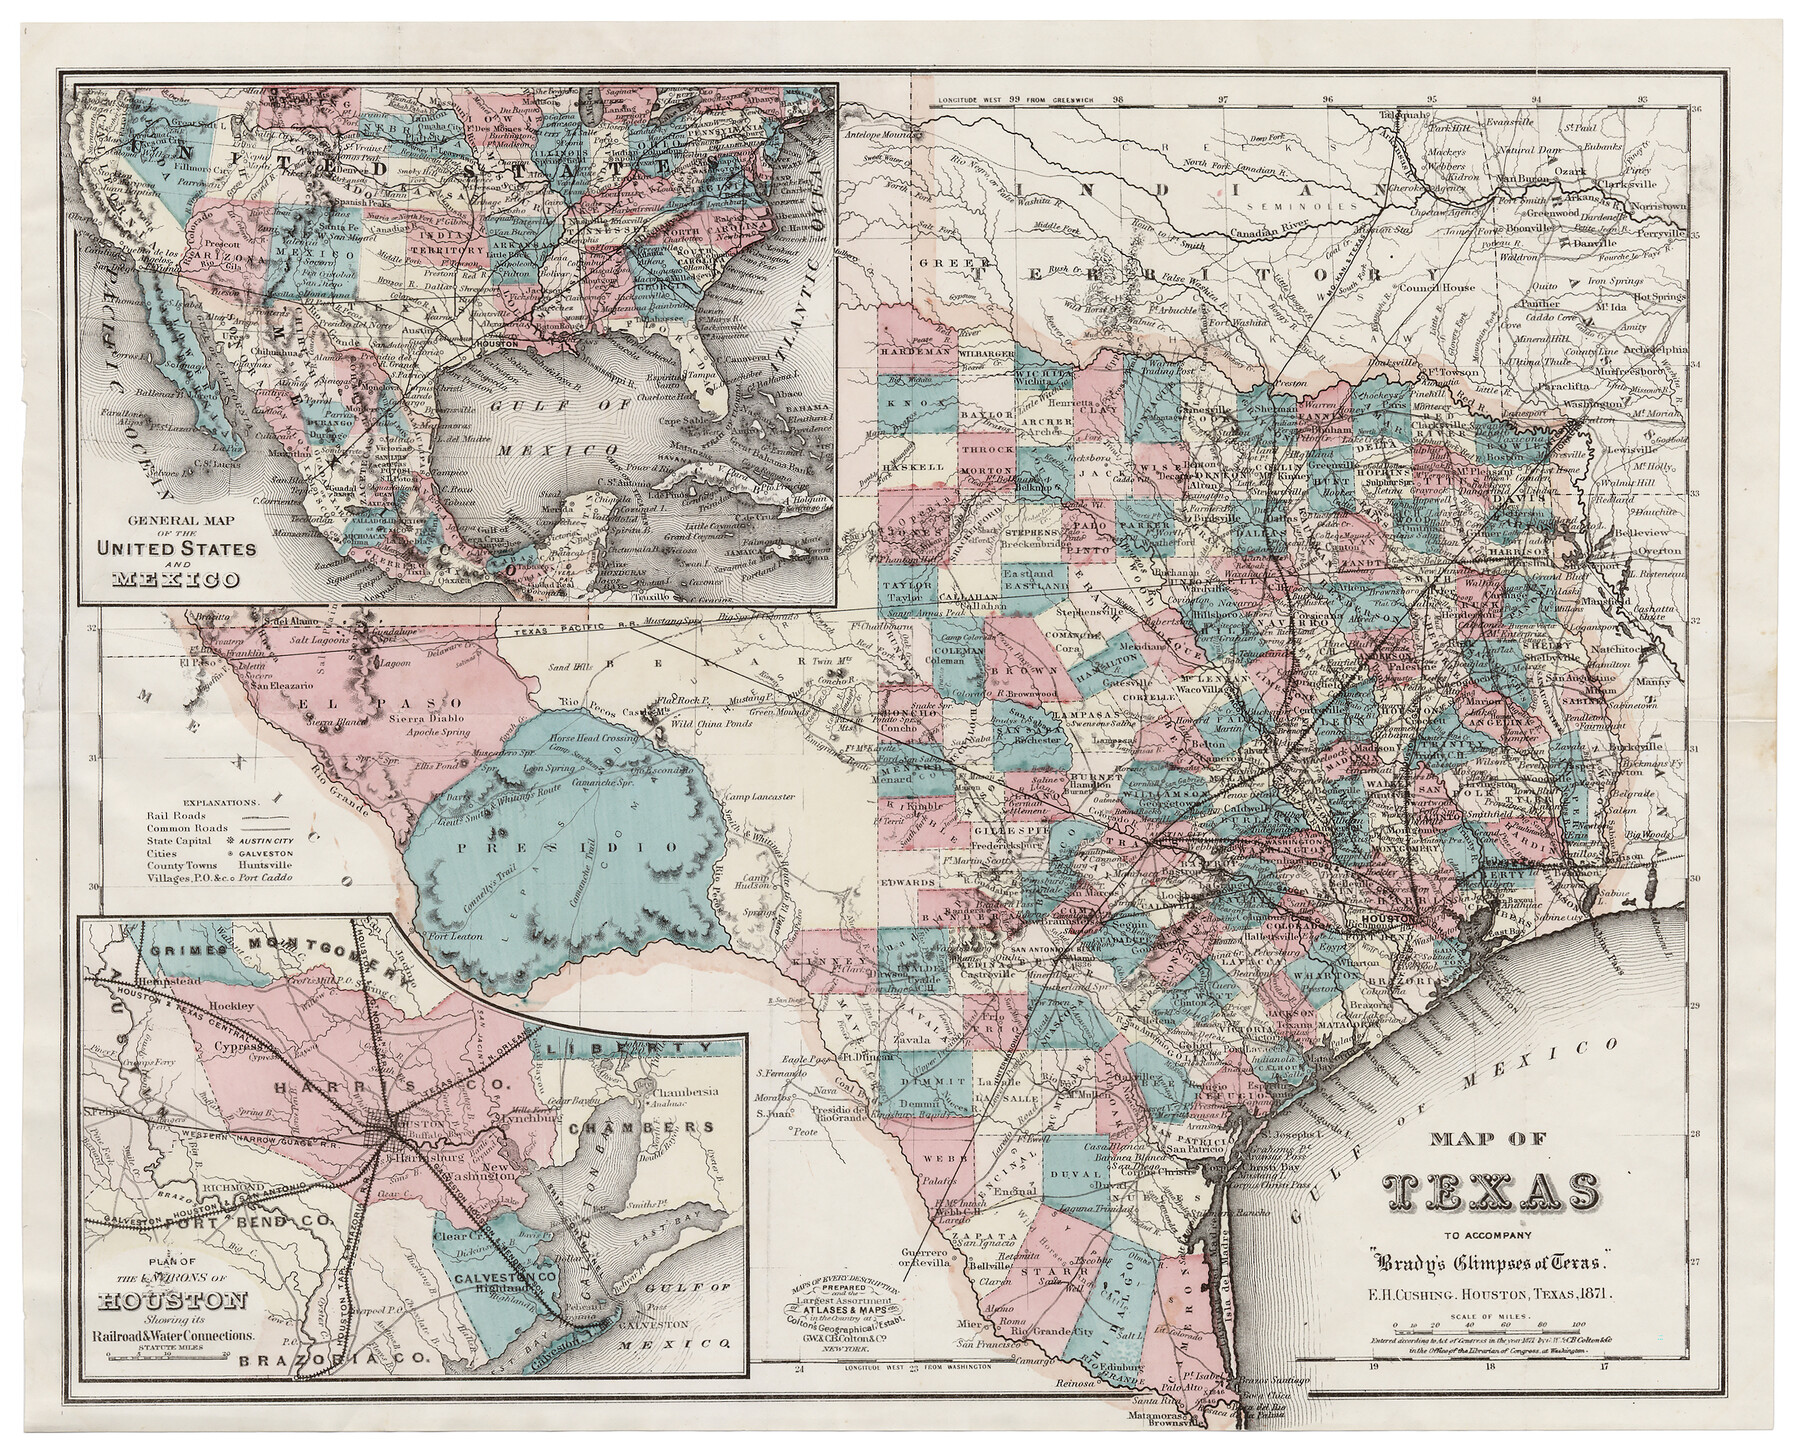 93907, Map of Texas to accompany "Brady's Glimpses of Texas", Holcomb Digital Map Collection